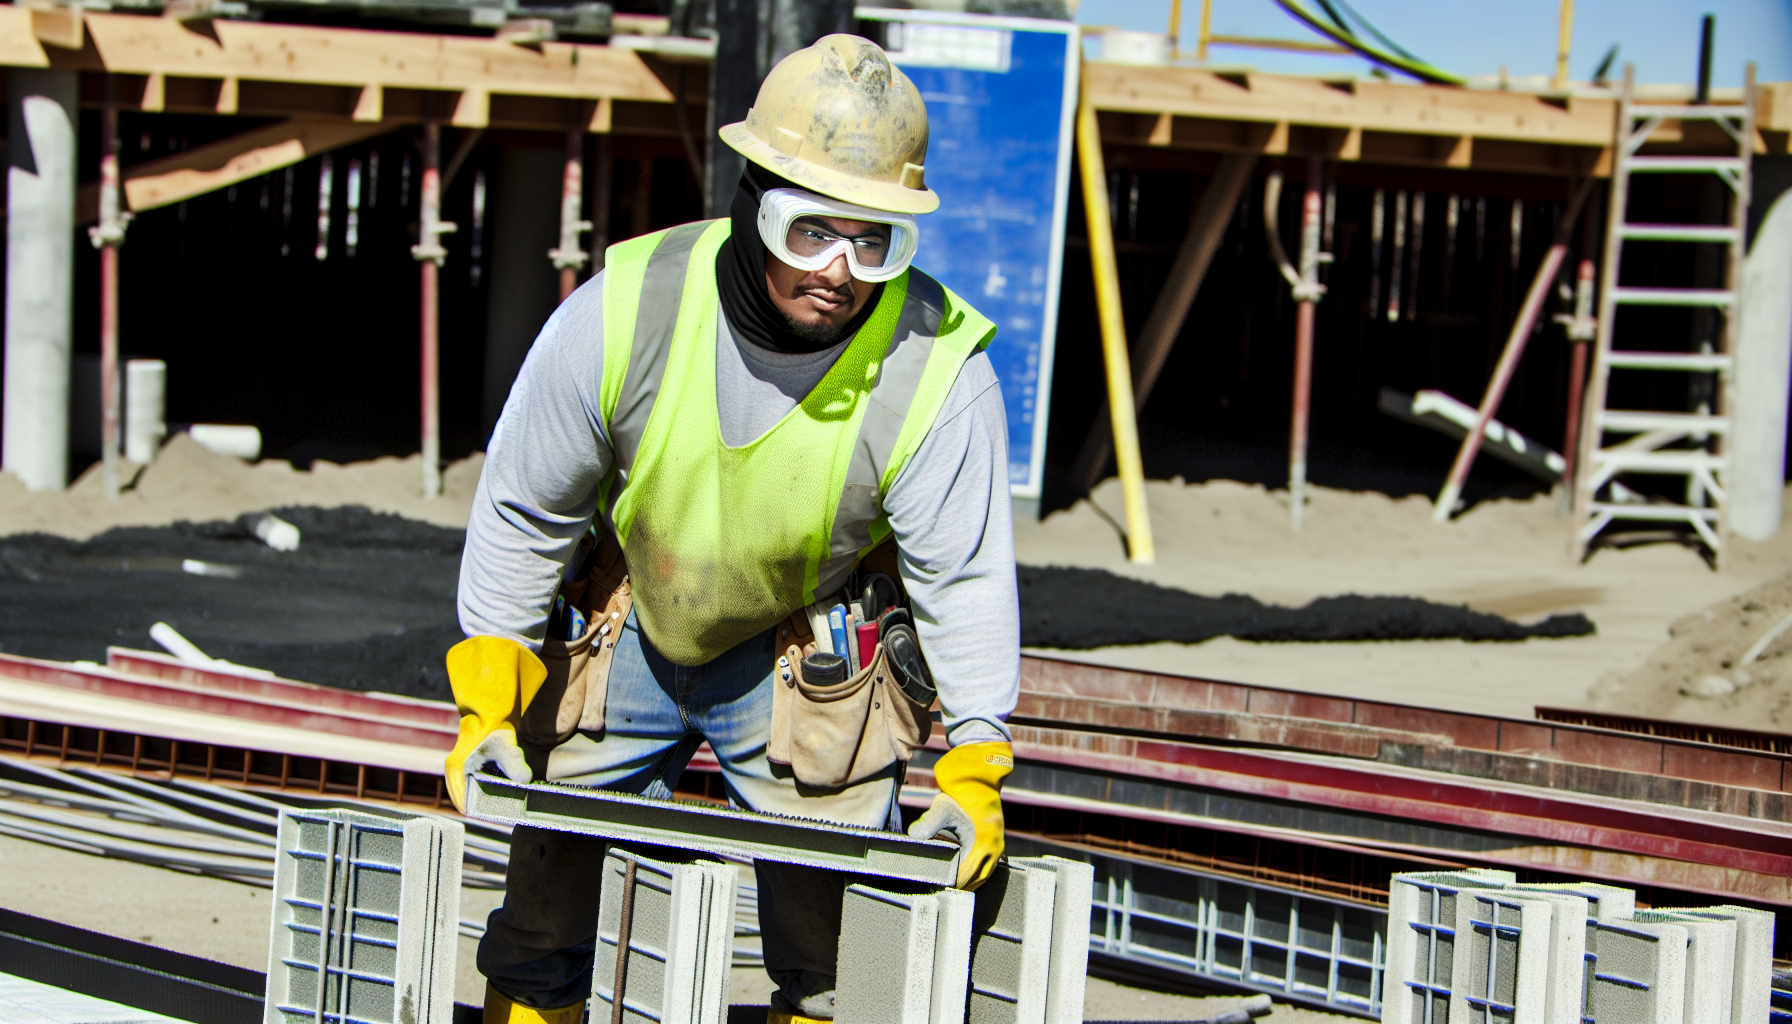 Worker wearing safety gear while handling concrete forms